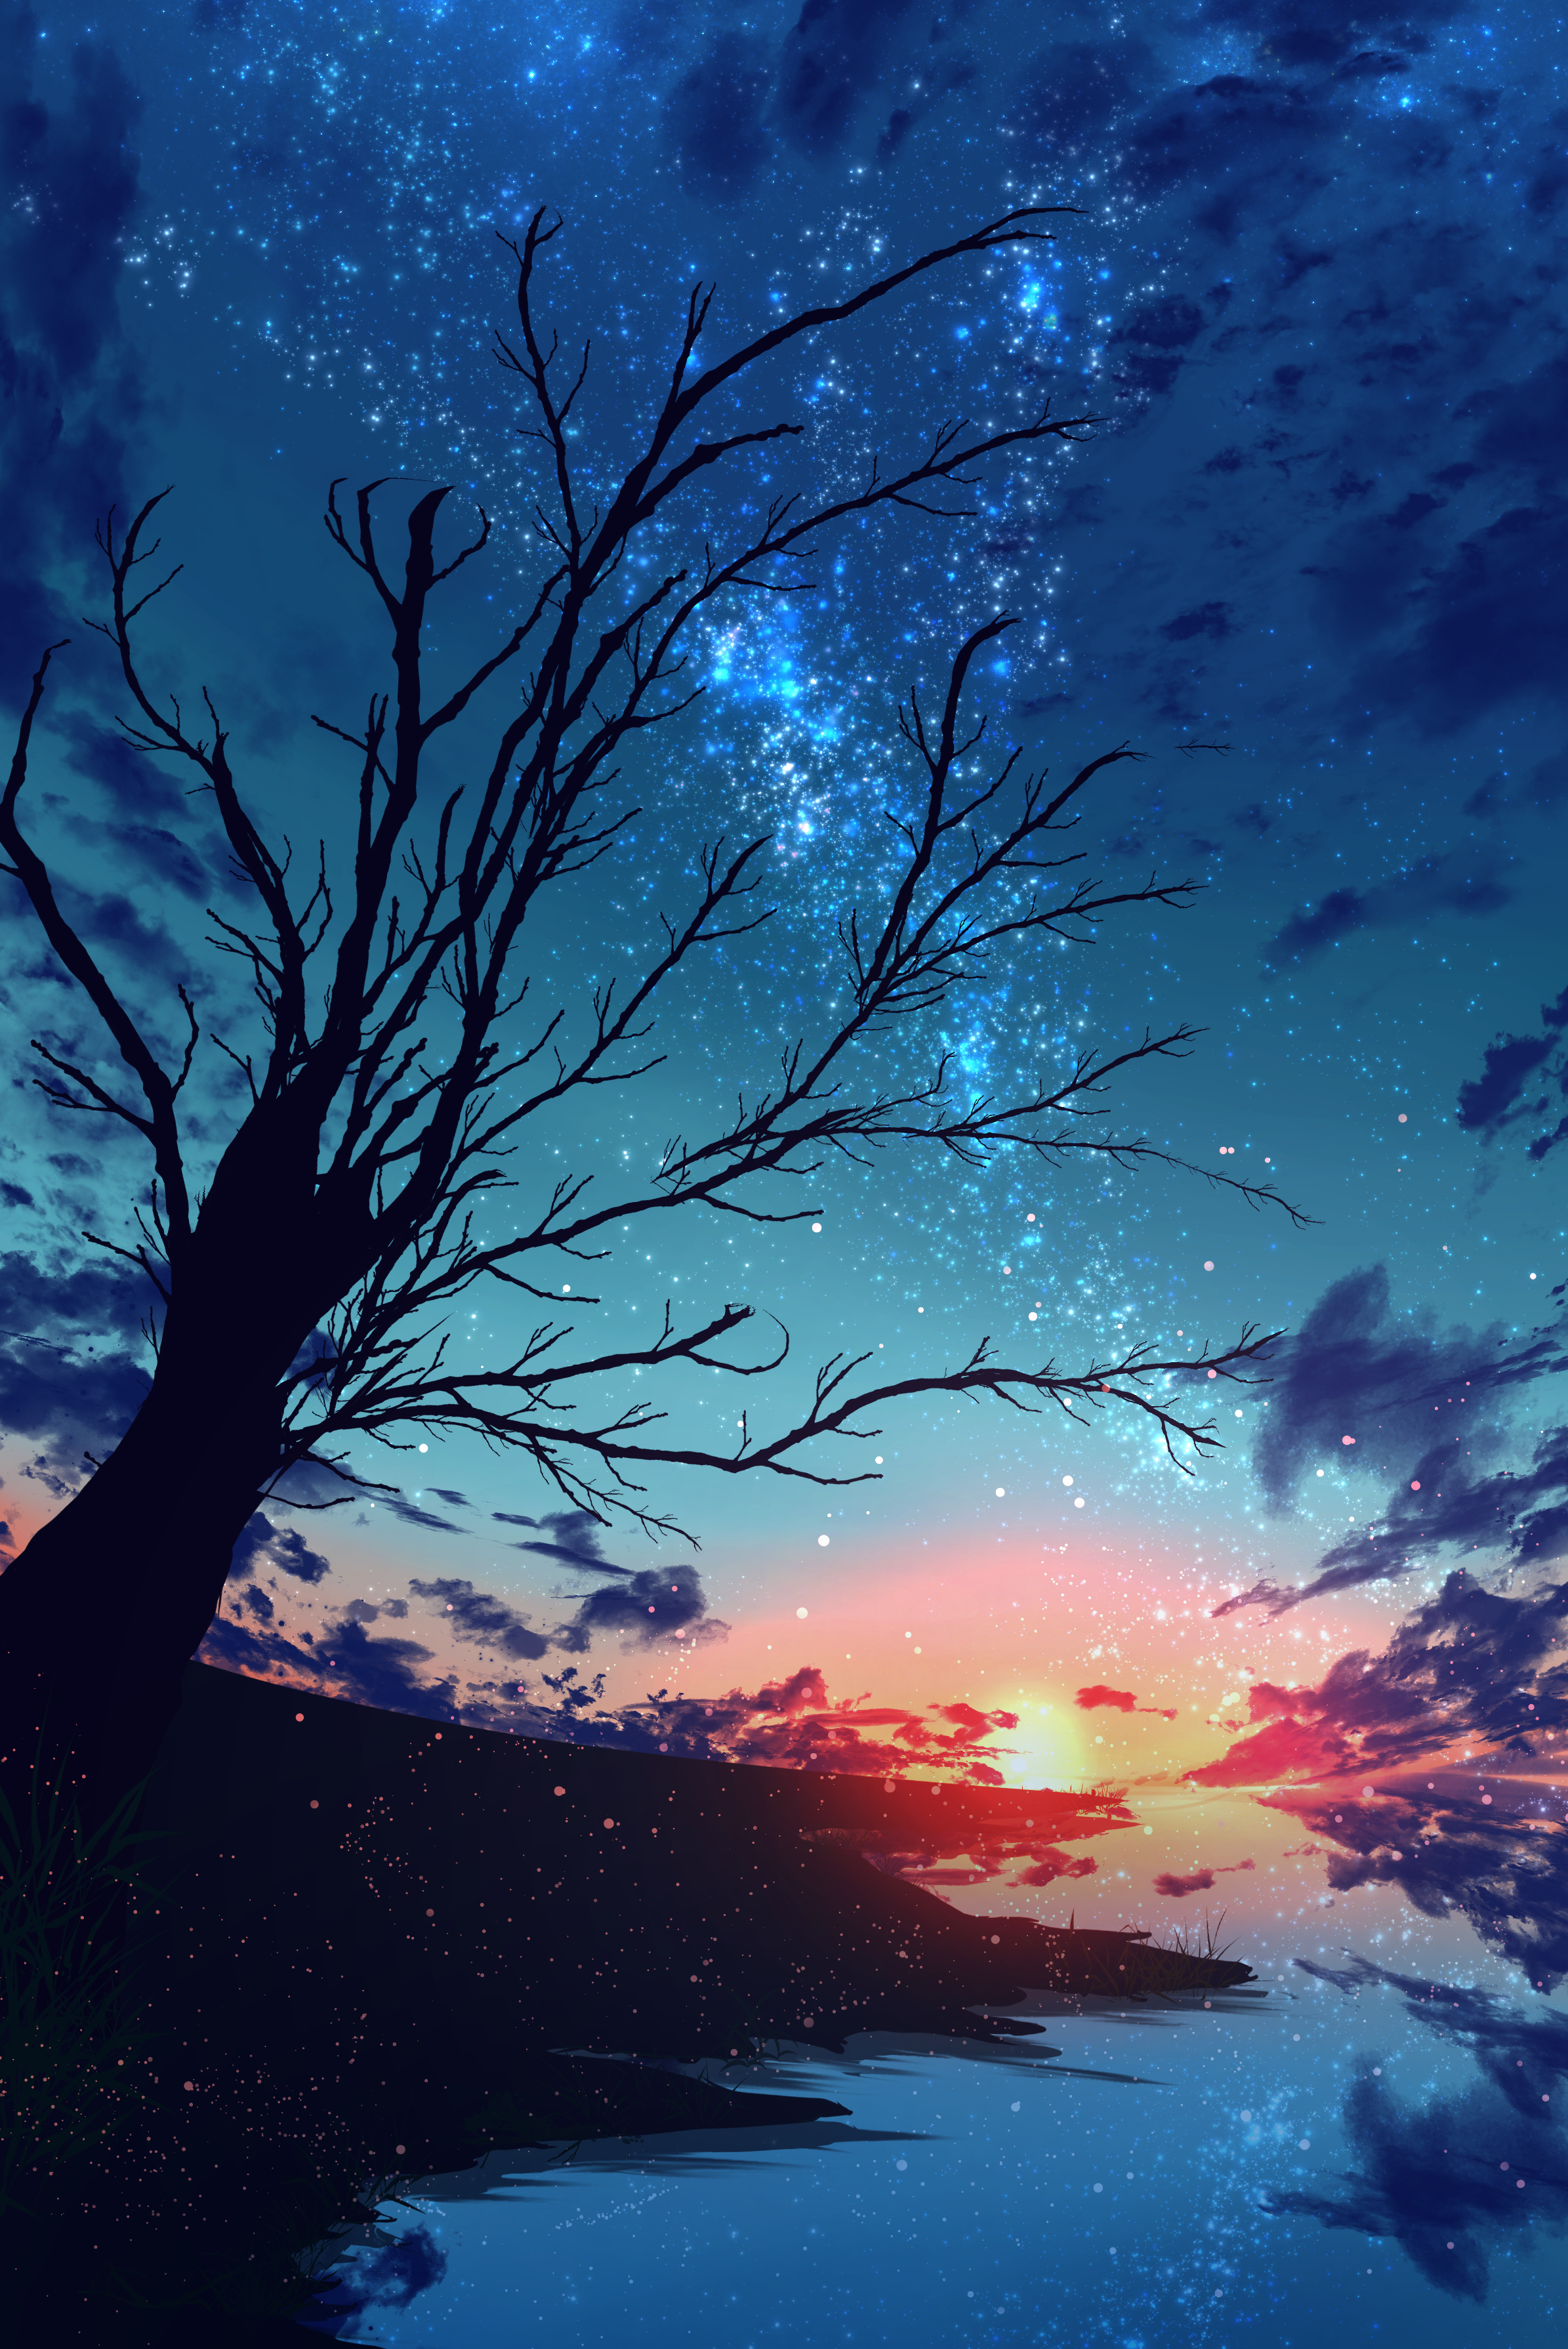 android art, sunset, stars, wood, tree, branches, nebula, particles